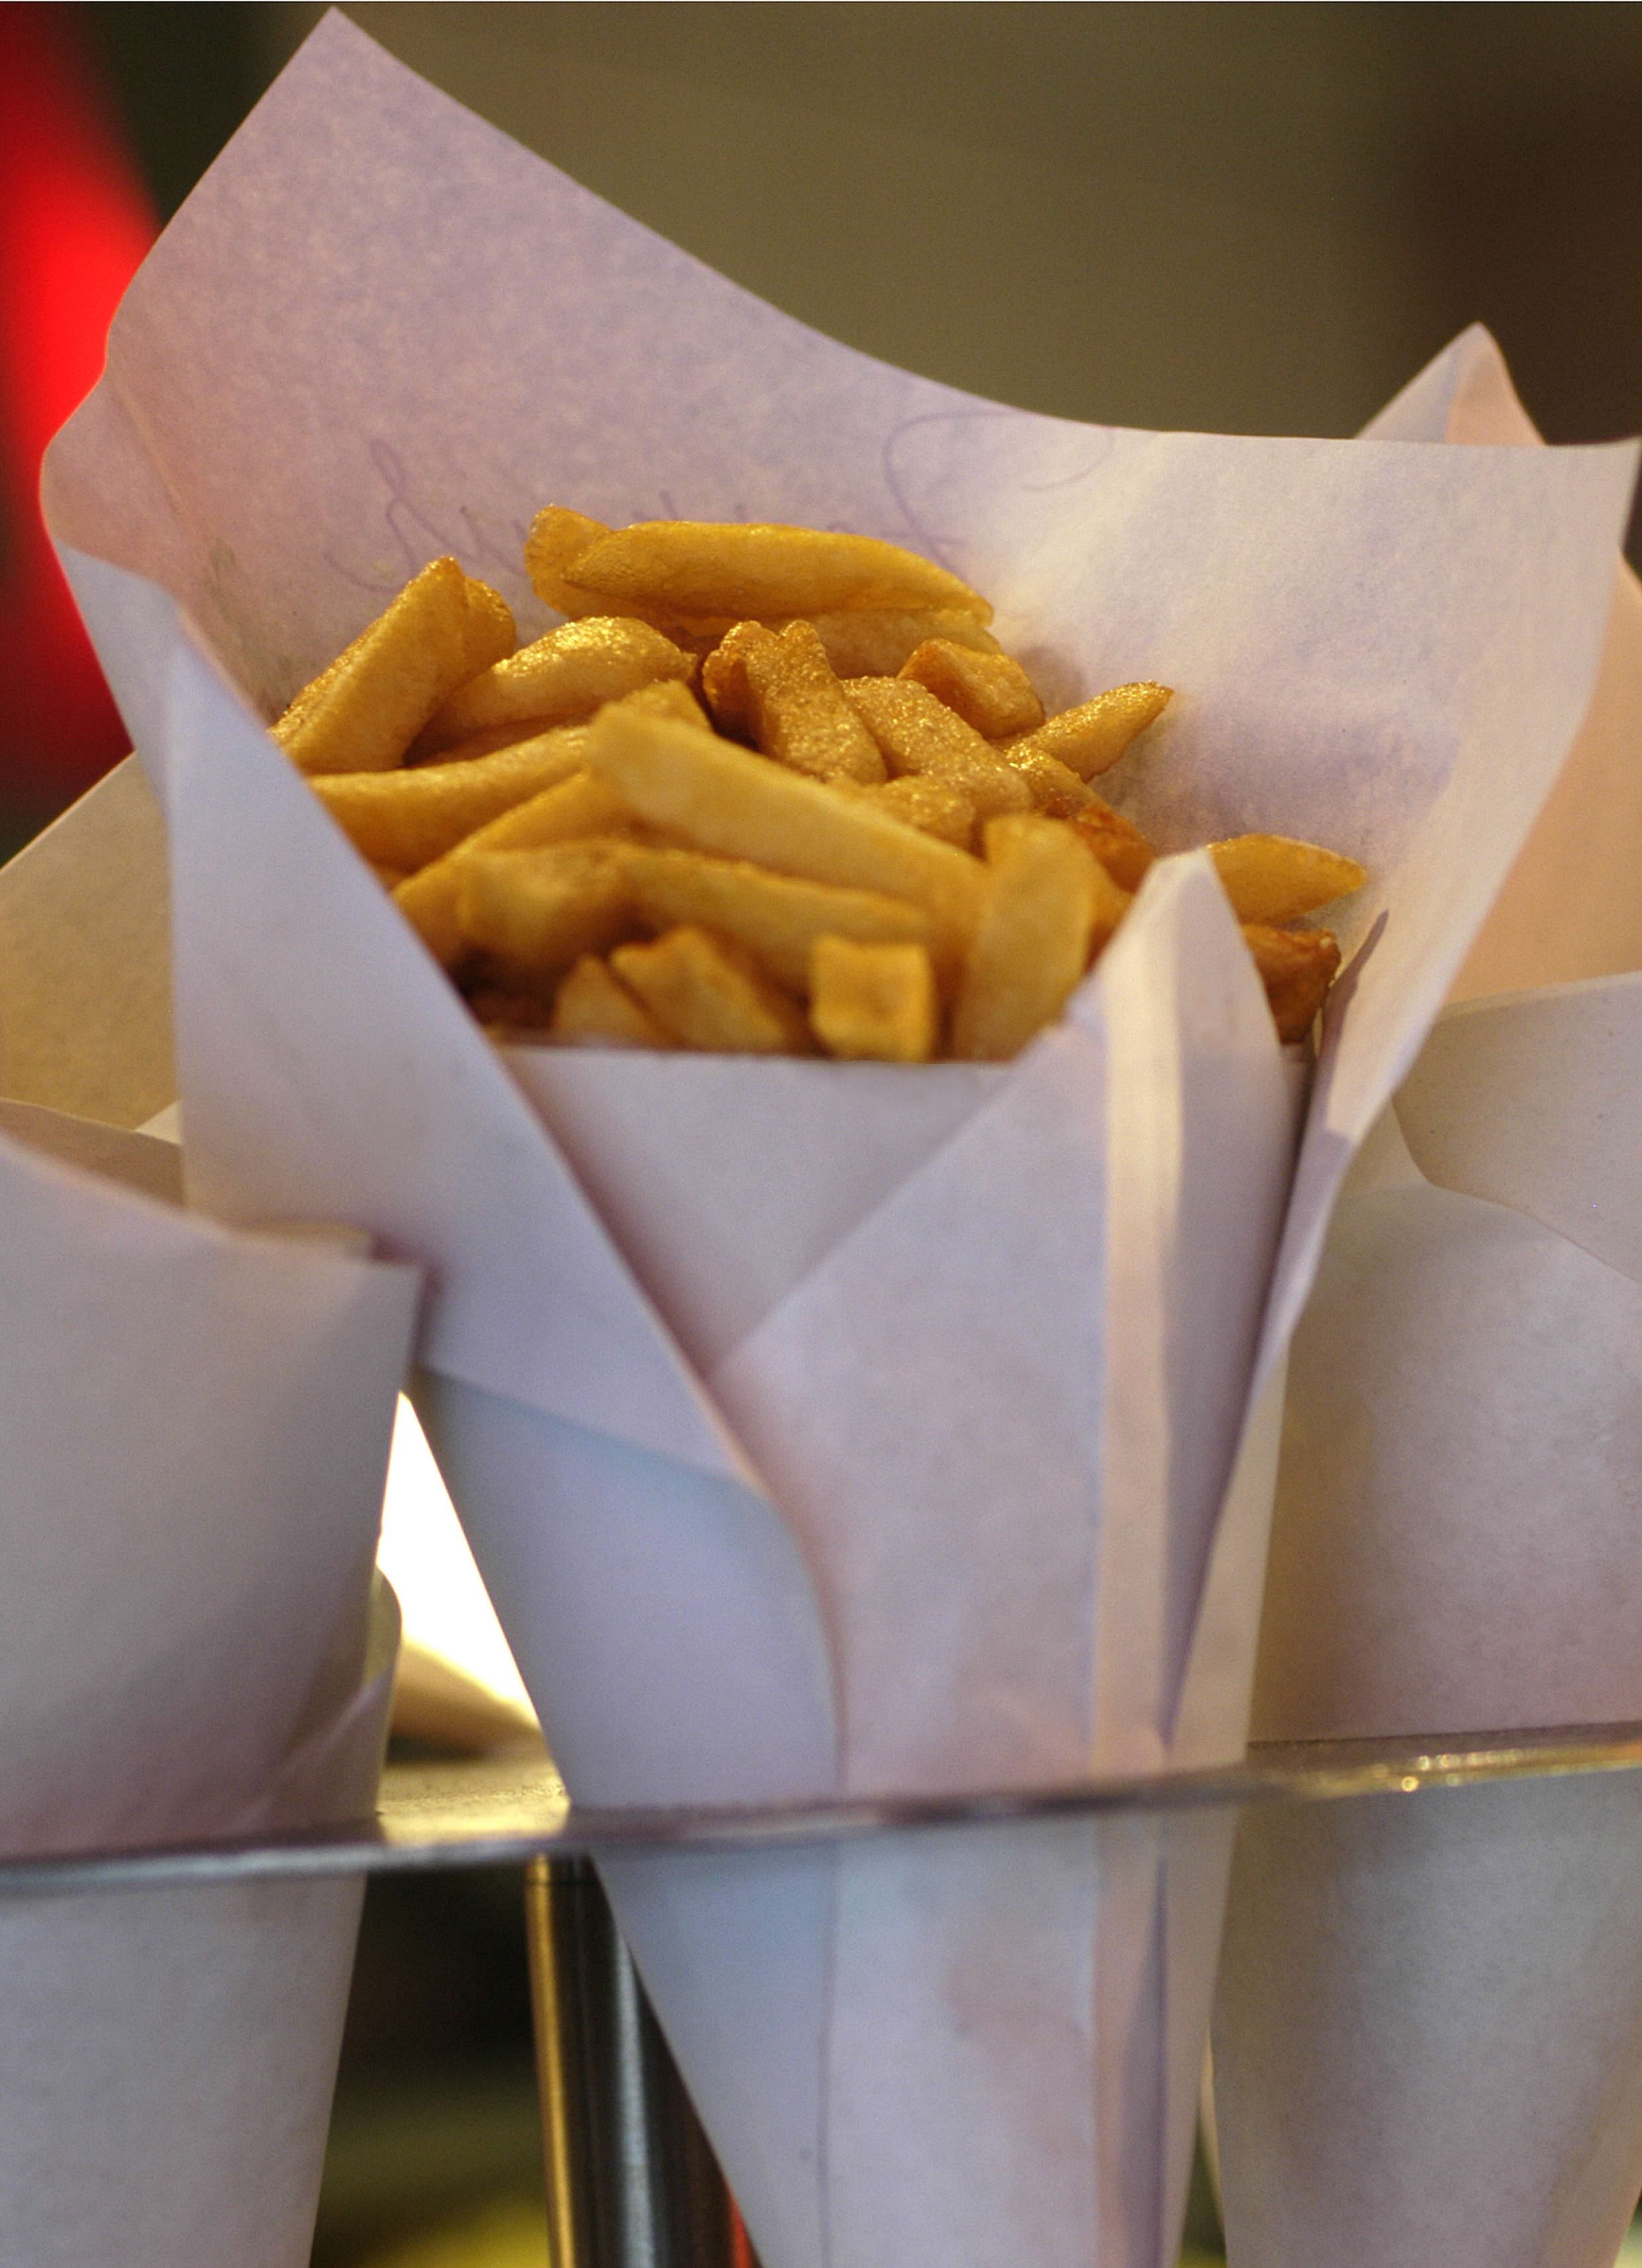 Brussels' fries are double cooked for a crispy bite. Credit: OPT-I.Monfort